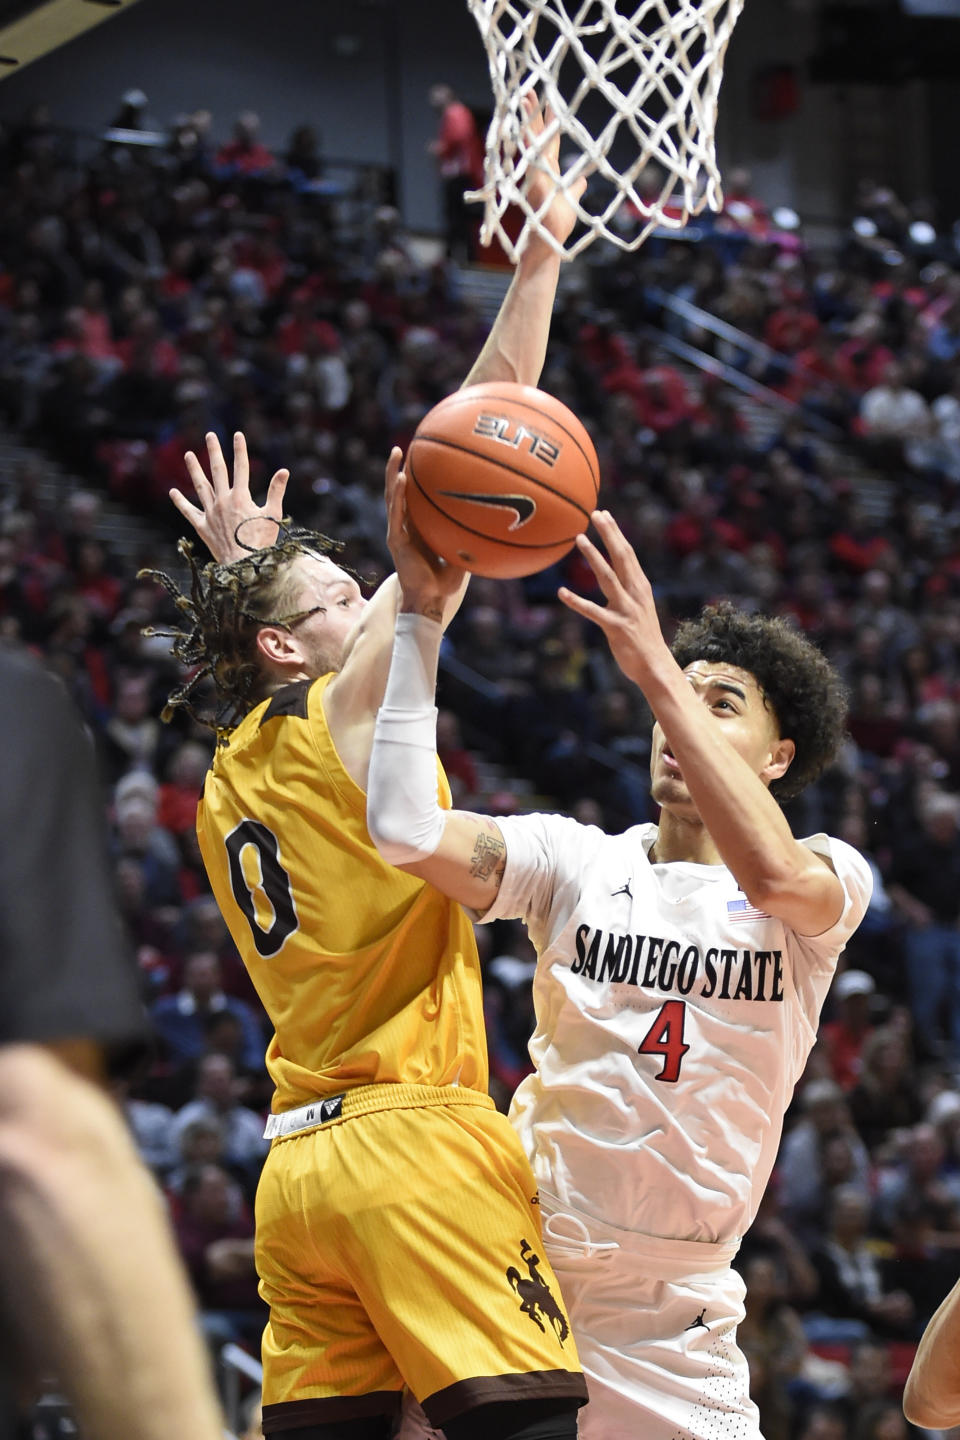 San Diego State guard Trey Pulliam (4) shoots past Wyoming guard Jake Hendricks (0) during the first half of an NCAA college basketball game Tuesday, Jan. 21, 2020, in San Diego. (AP Photo/Denis Poroy)